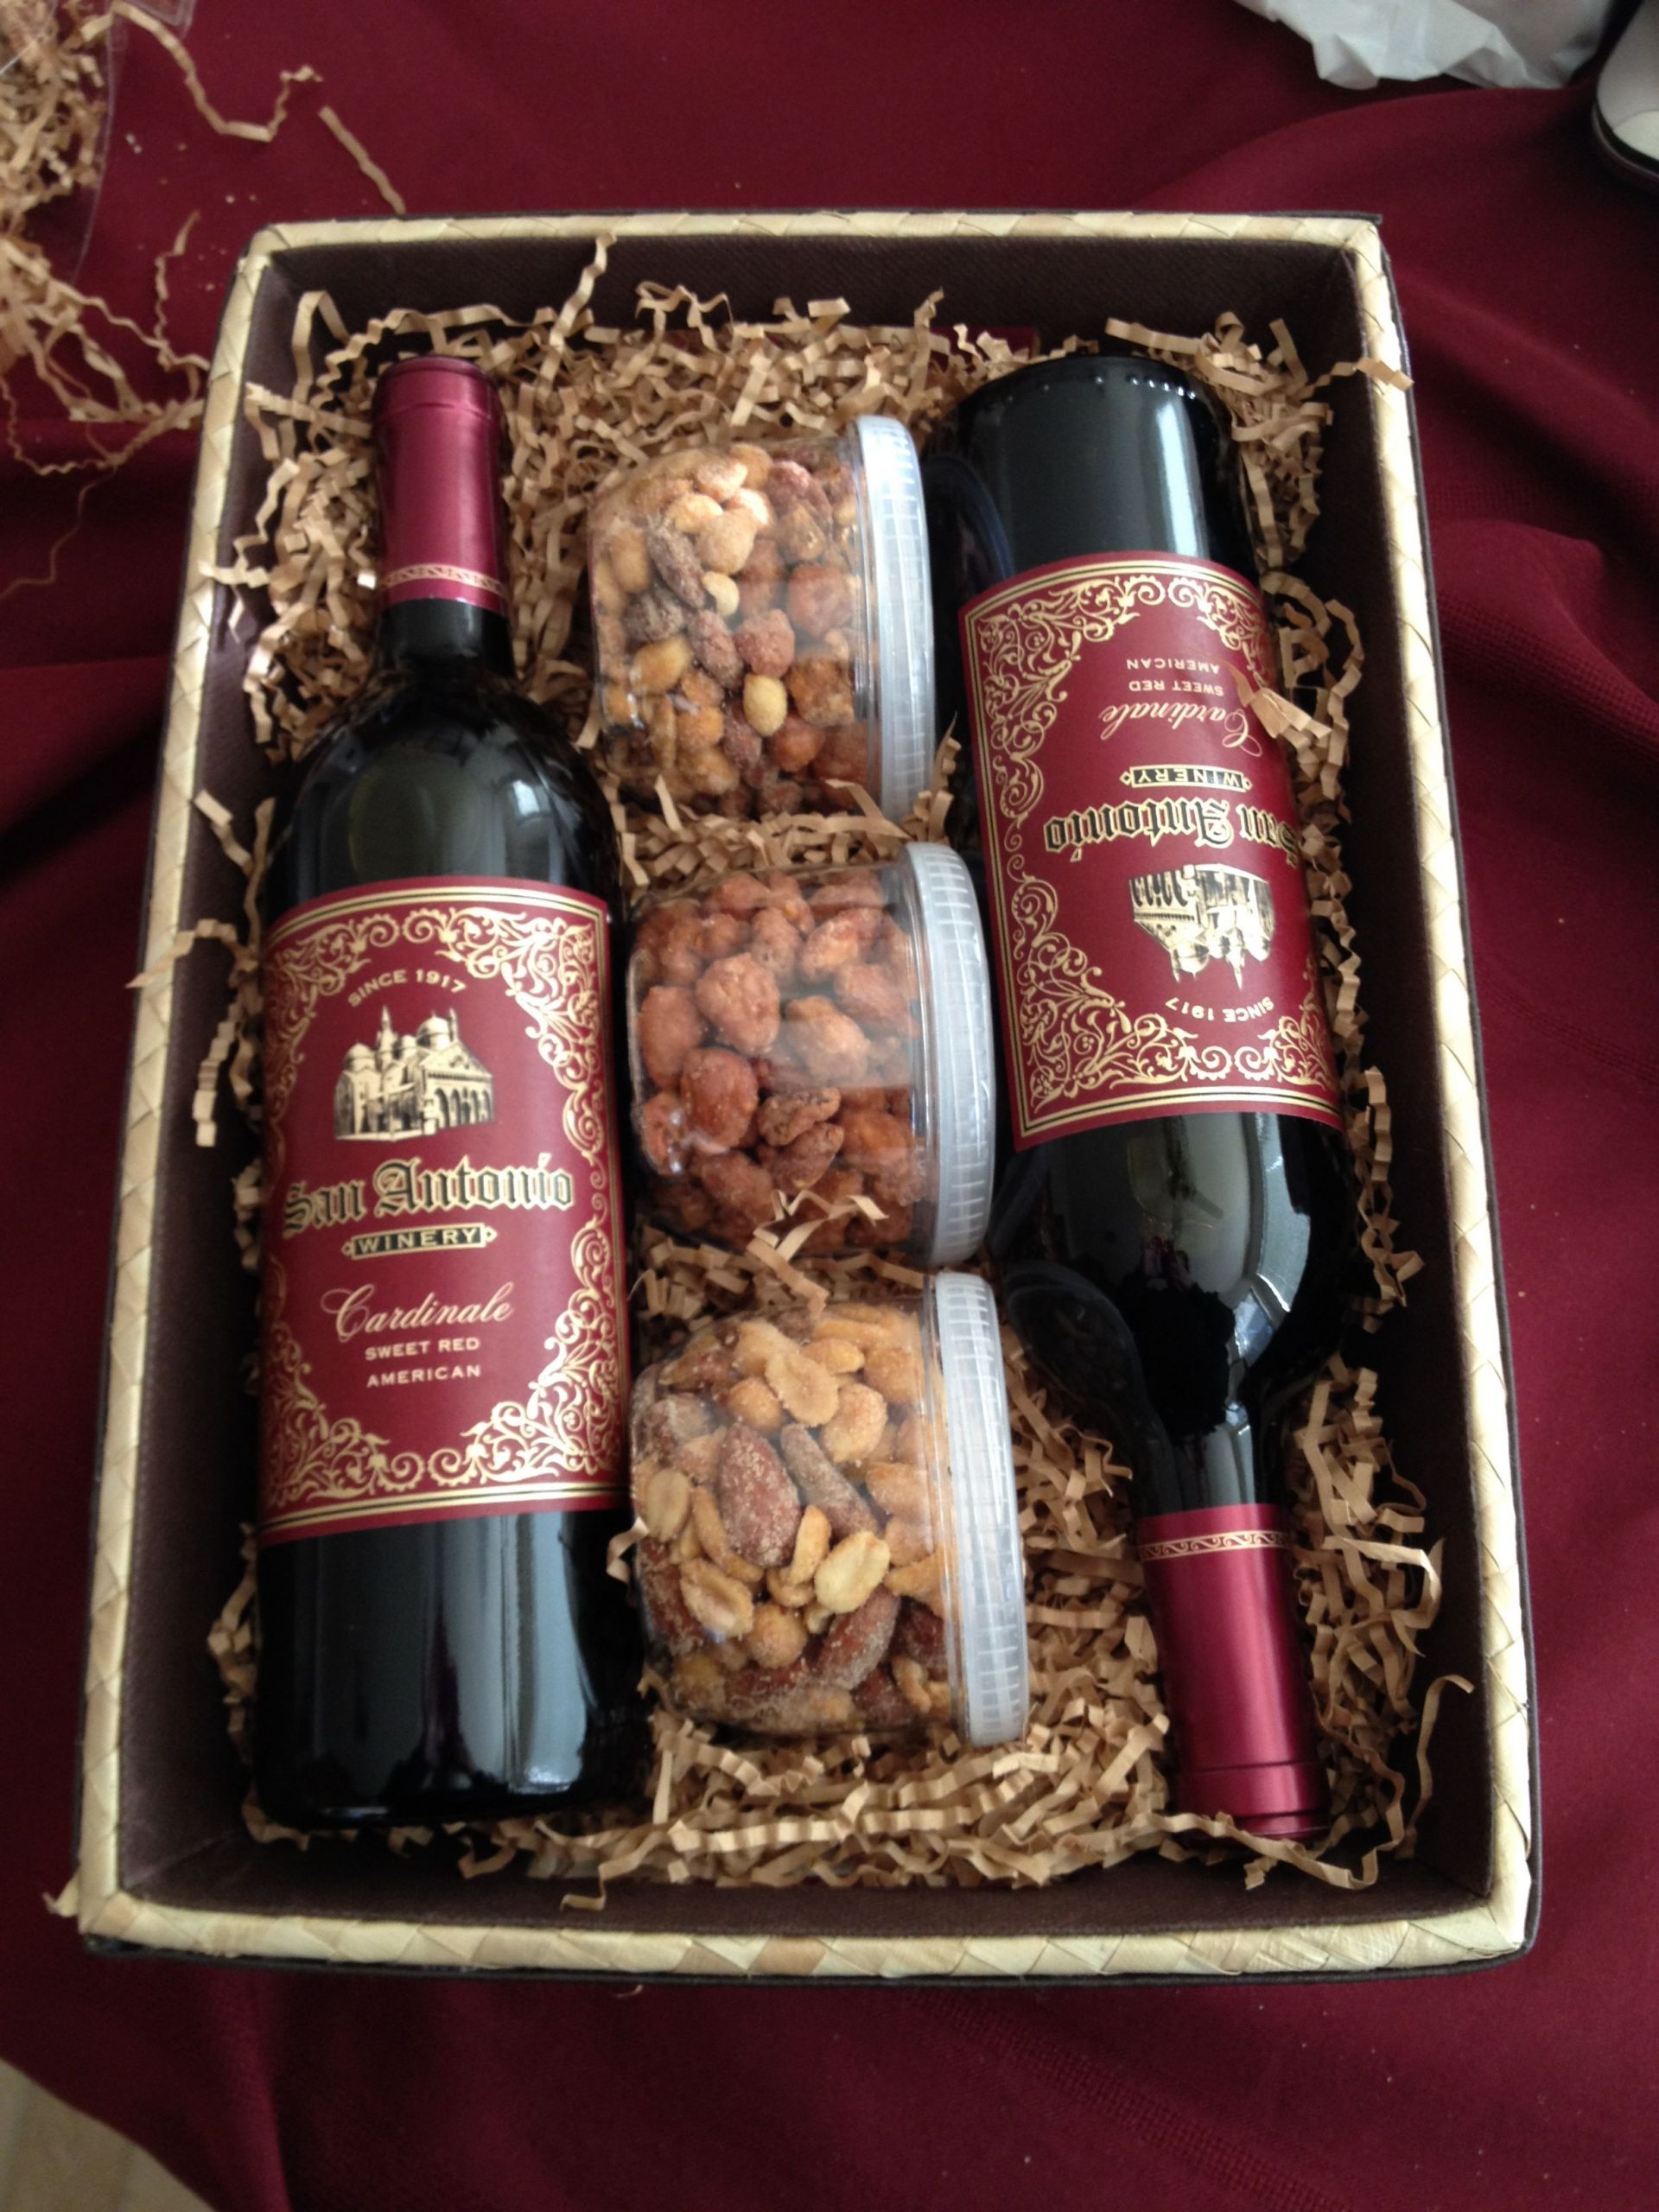 Wine Gift Basket Ideas
 Wine Gift Basket Nuts are a good idea to add to the wine